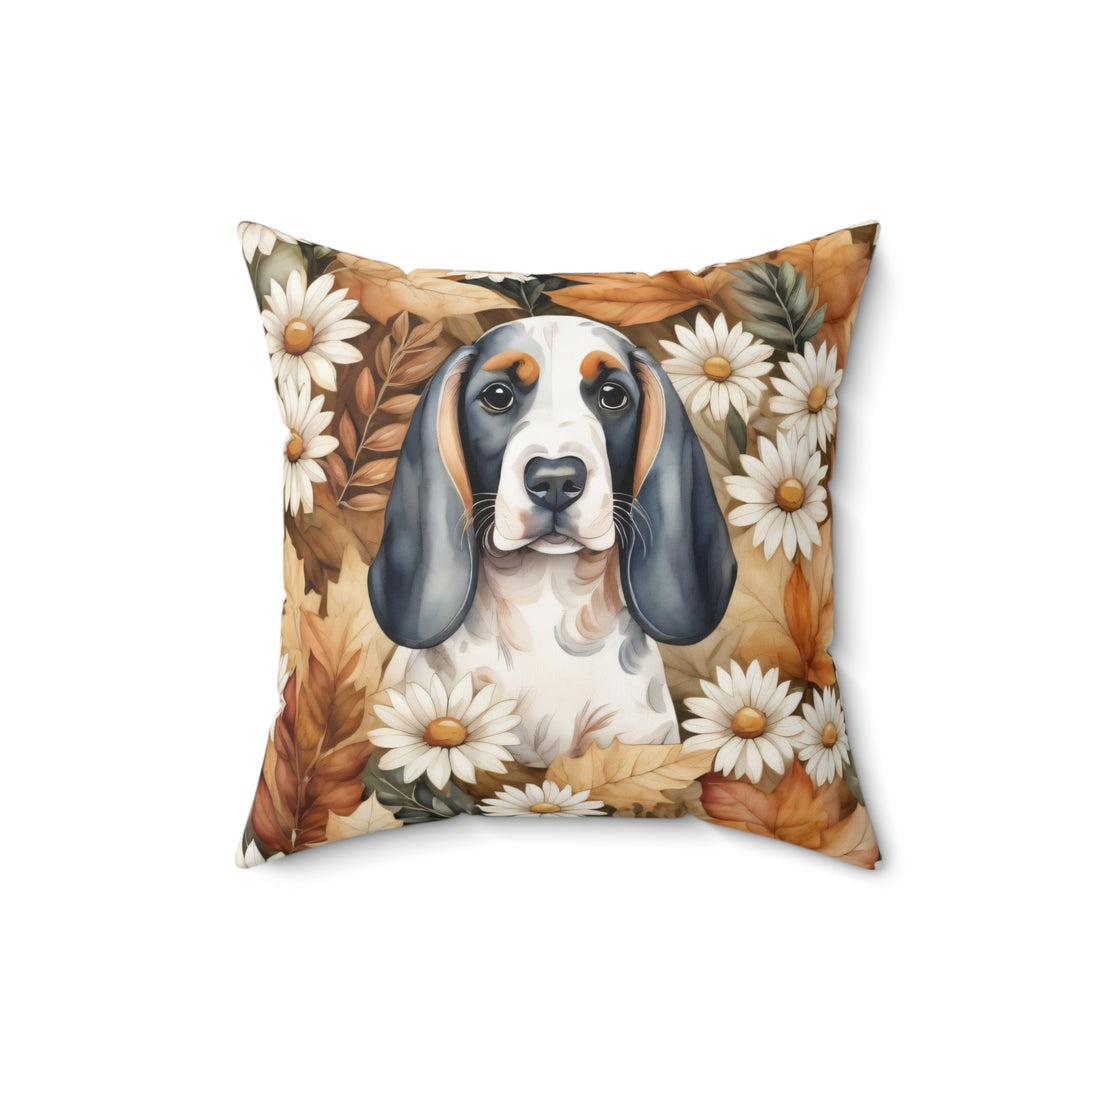 Basset Hound In The Meadow of Autumn Daisies Pillow